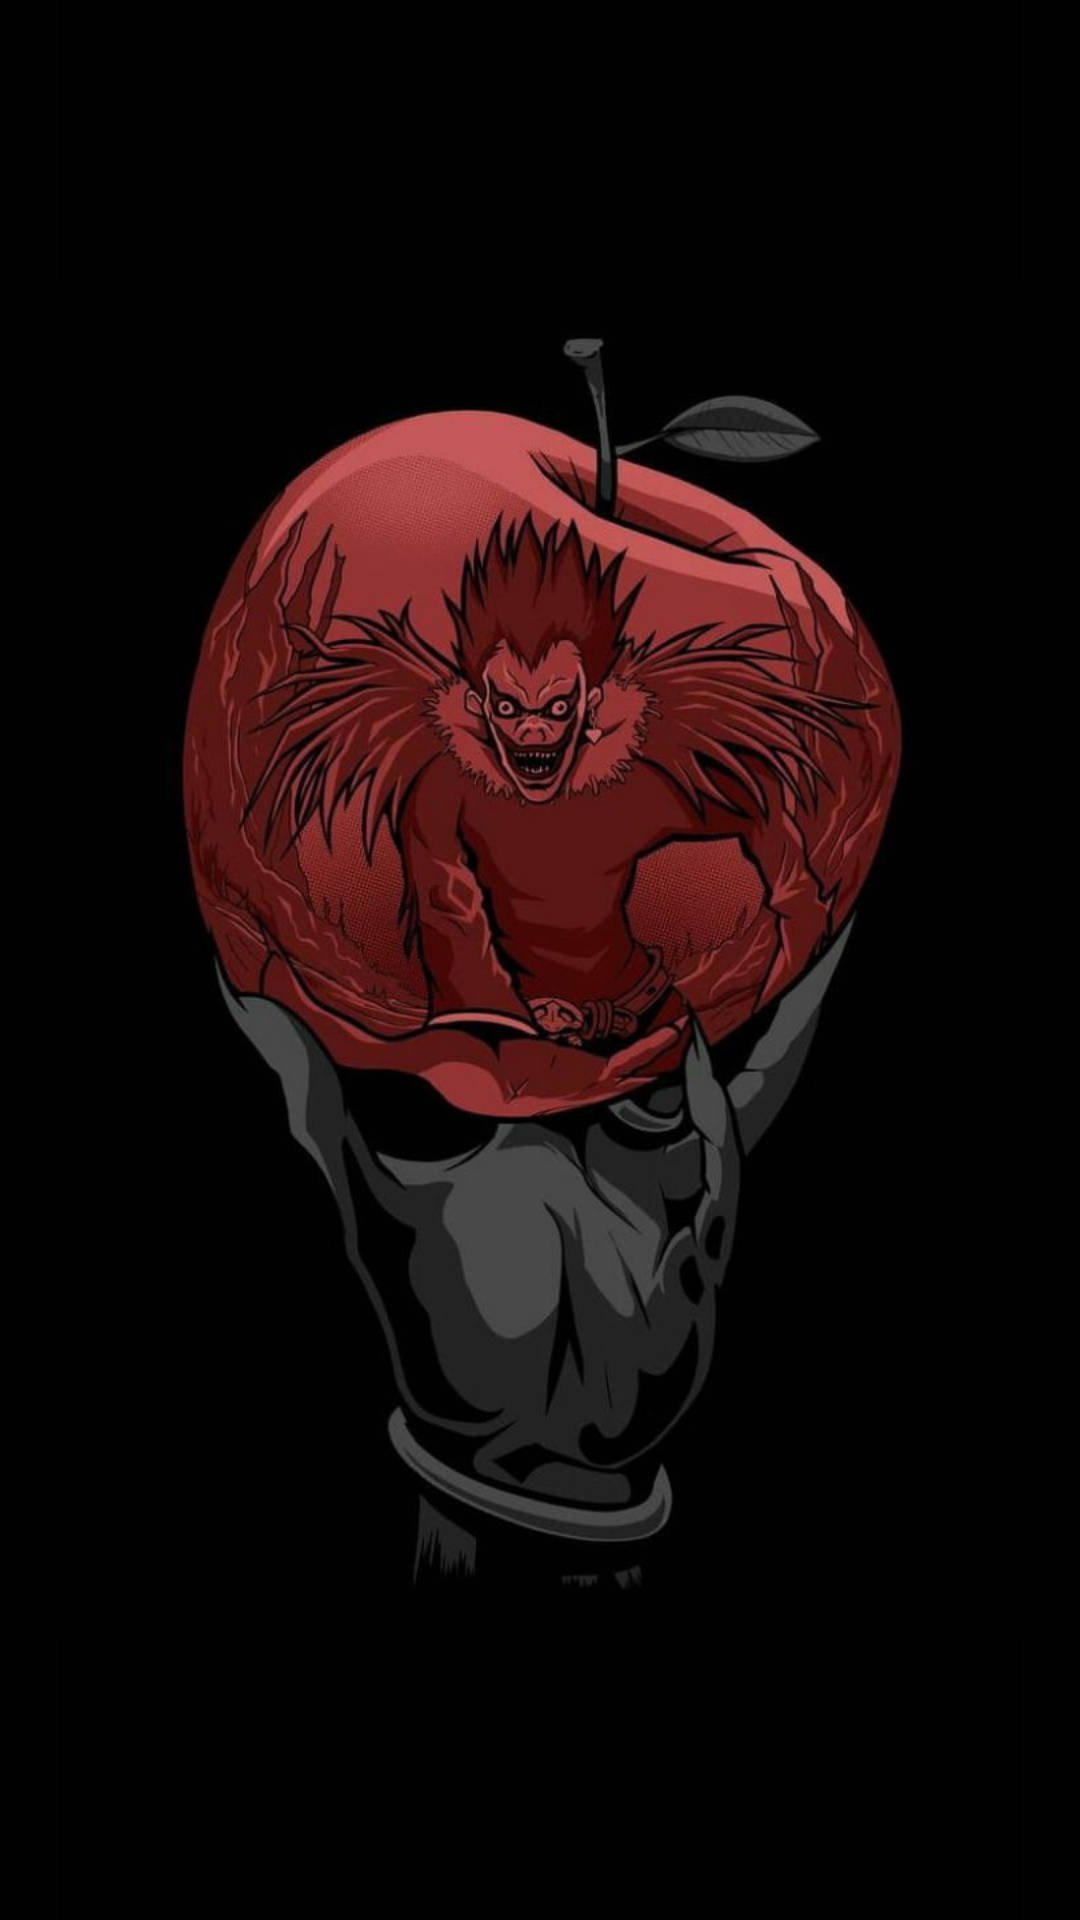 Download Apple Reflecting Ryuk From Death Note Phone Wallpaper